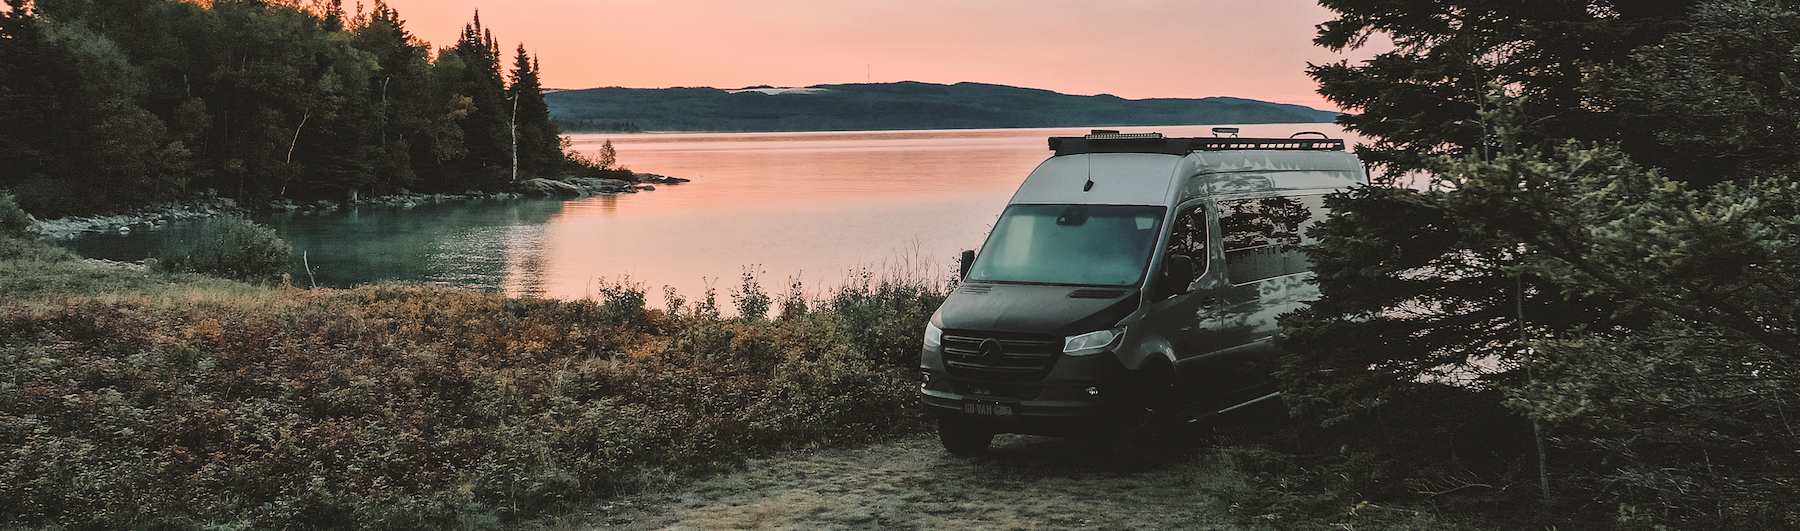 The 5 Best Reasons to Have a Security Camera as a Vanlife Accessory